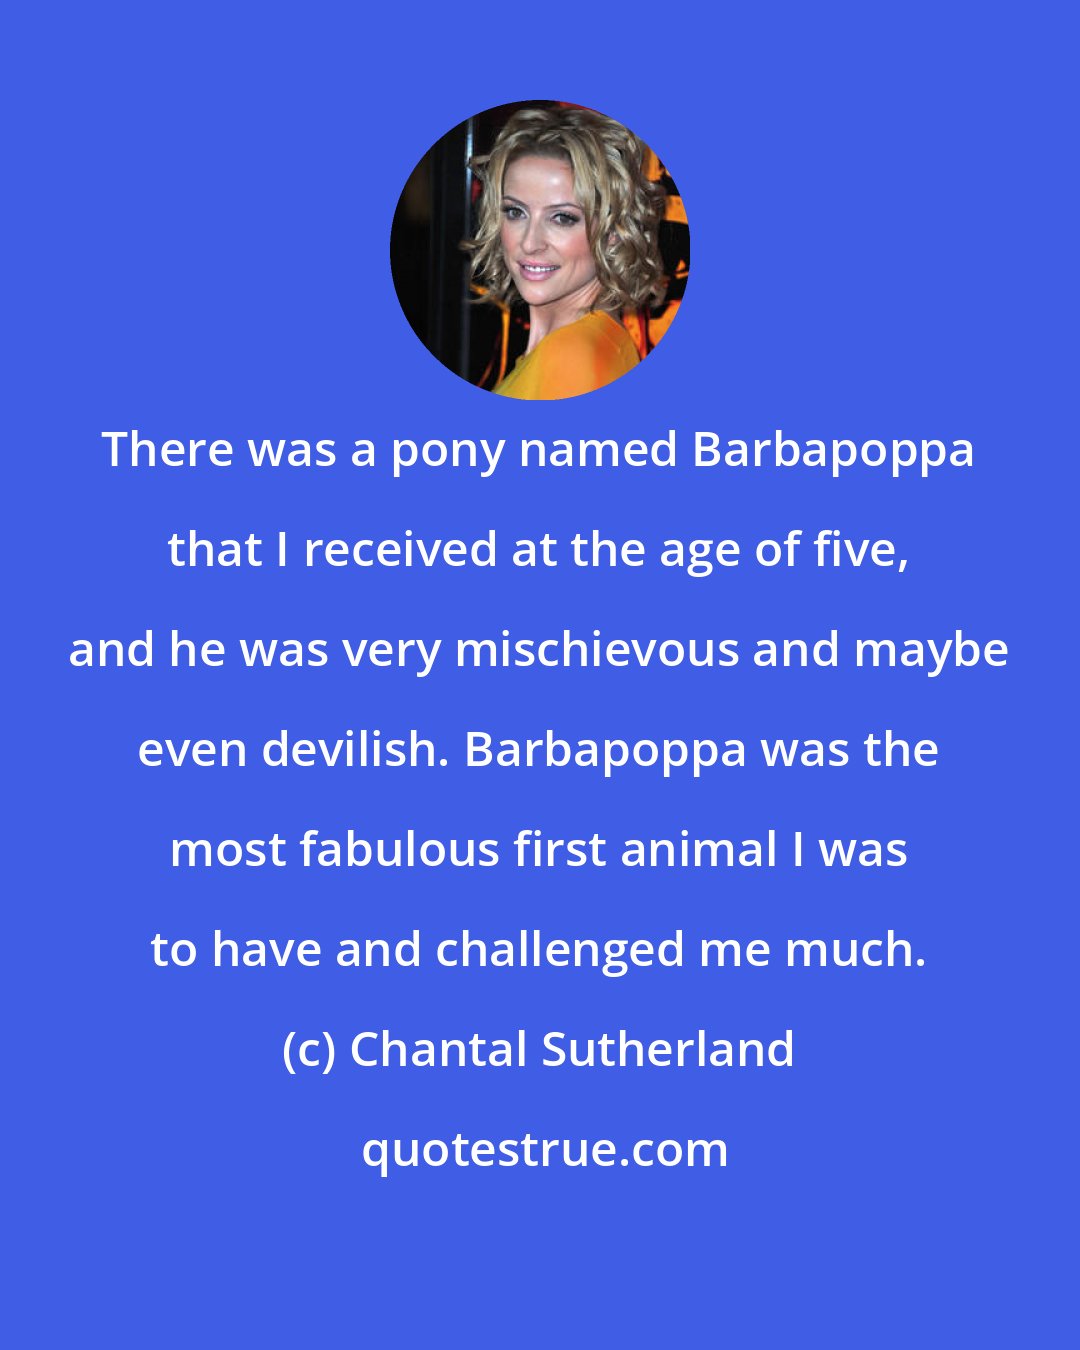 Chantal Sutherland: There was a pony named Barbapoppa that I received at the age of five, and he was very mischievous and maybe even devilish. Barbapoppa was the most fabulous first animal I was to have and challenged me much.